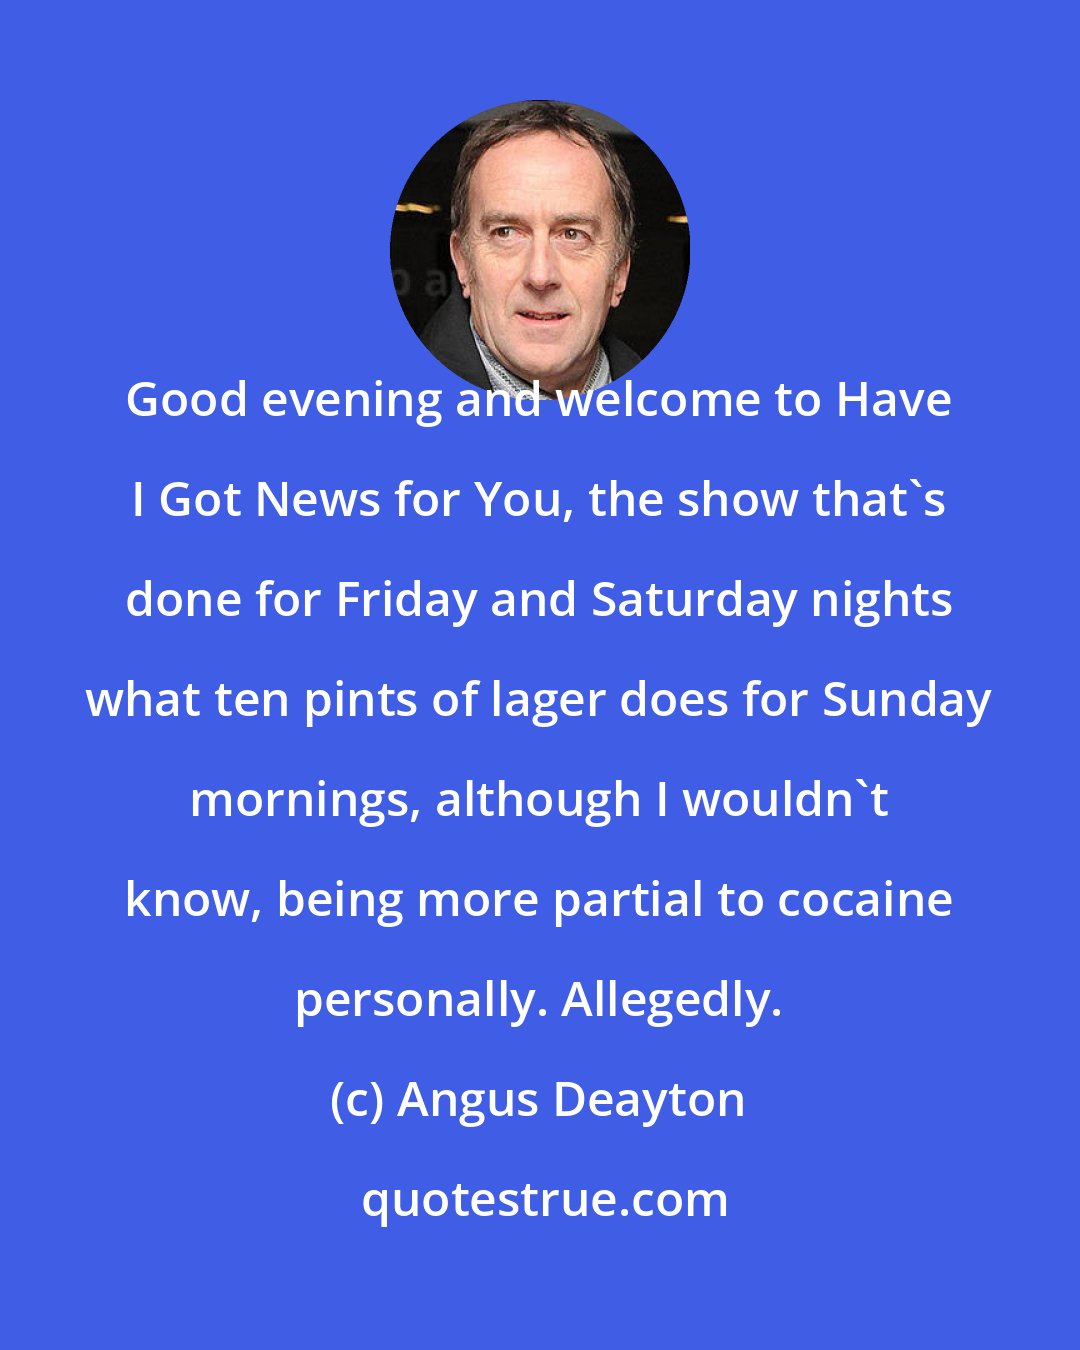 Angus Deayton: Good evening and welcome to Have I Got News for You, the show that's done for Friday and Saturday nights what ten pints of lager does for Sunday mornings, although I wouldn't know, being more partial to cocaine personally. Allegedly.